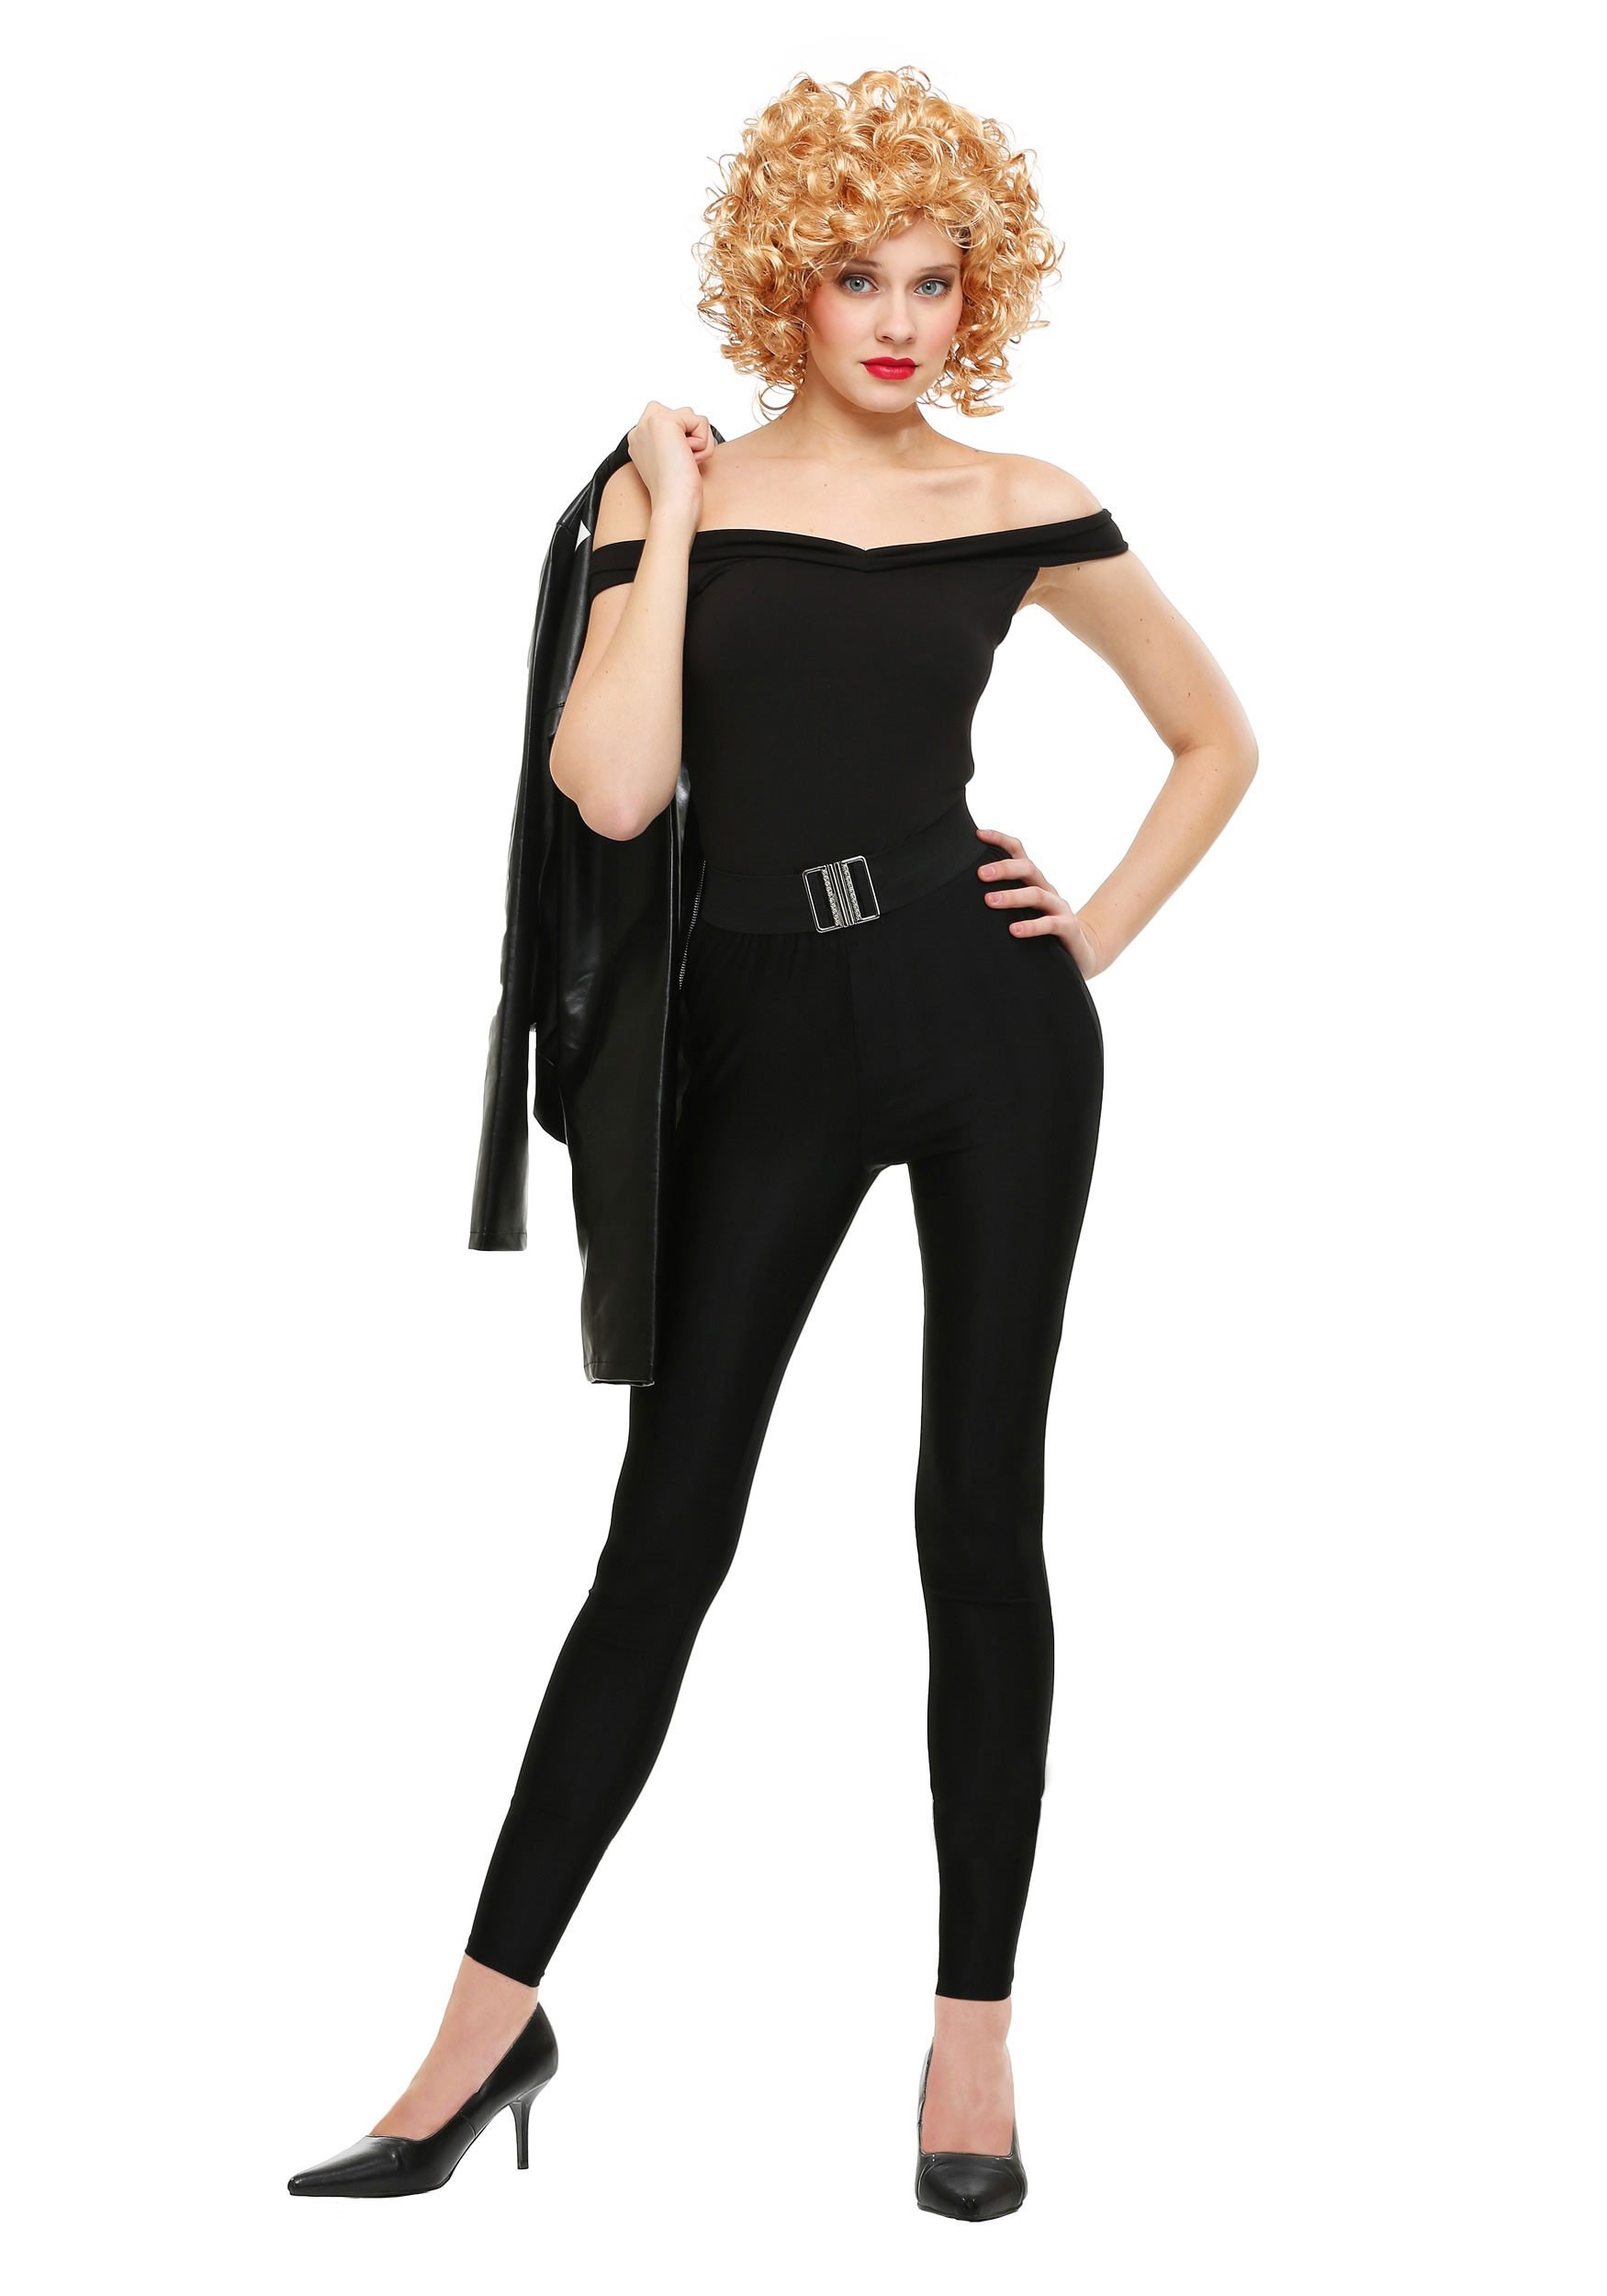 Grease Women's Plus Size Bad Sandy Costume - image 1 of 2